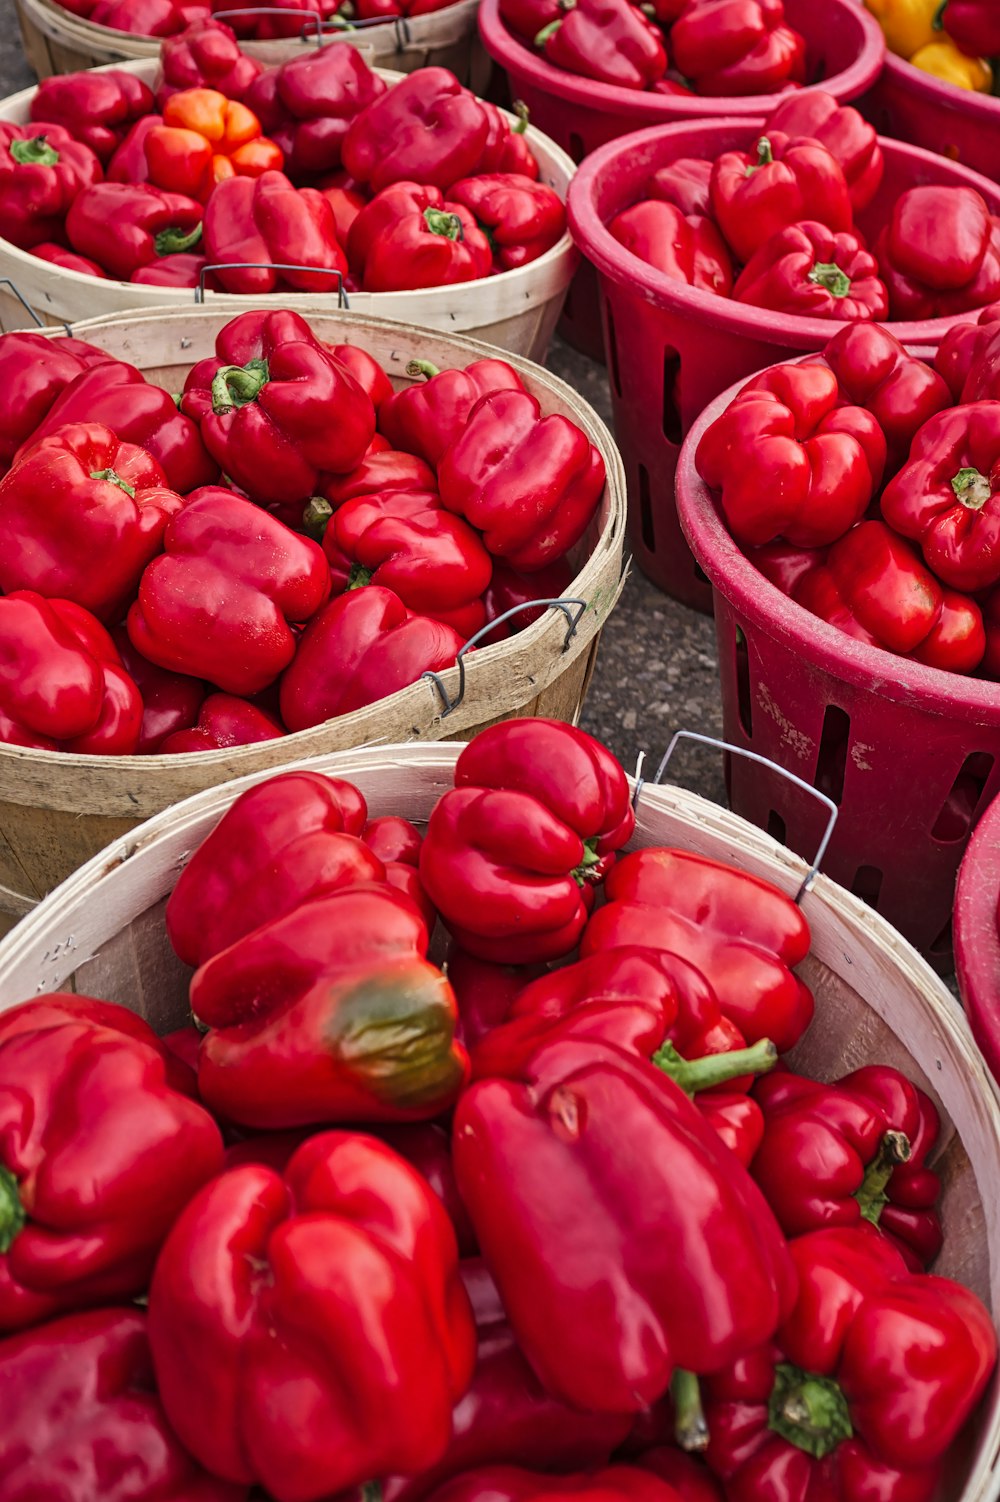 red bell pepper lot in baskets